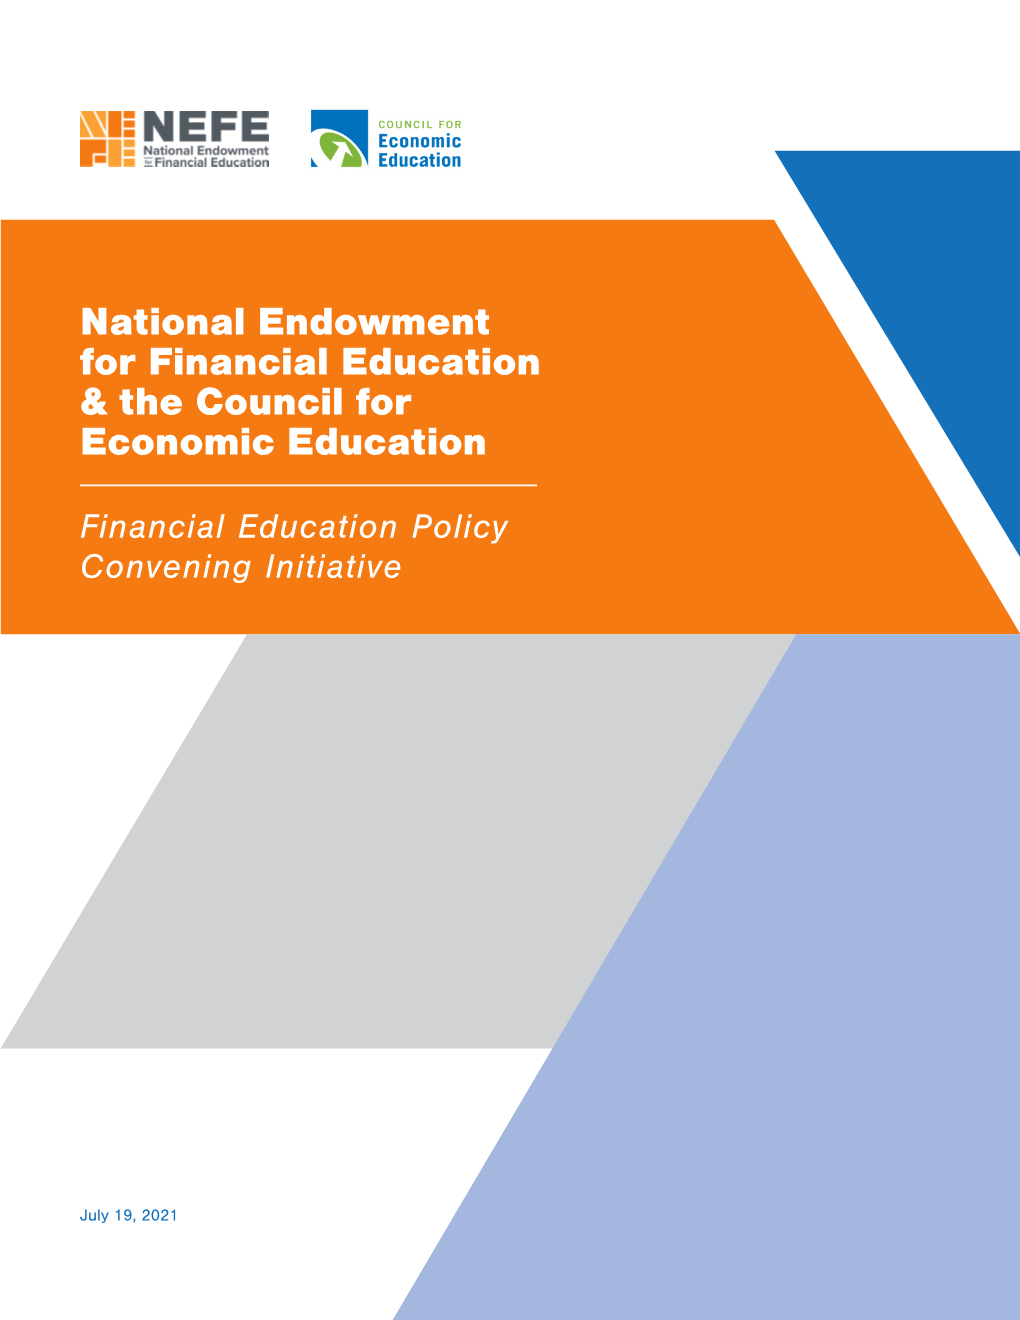 National Endowment for Financial Education & the Council For